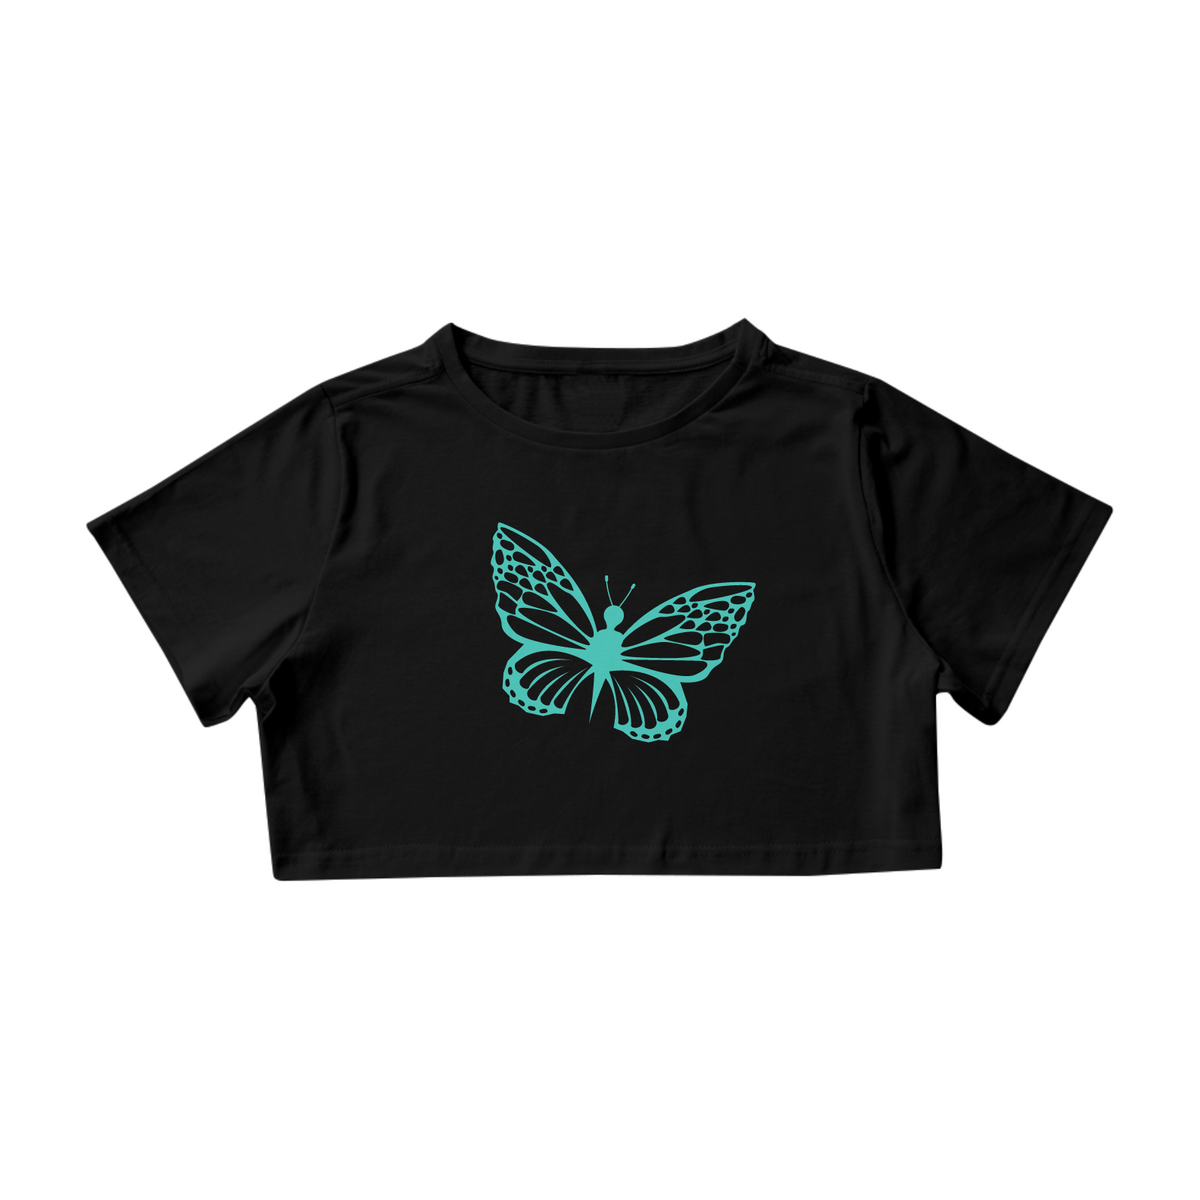 Nome do produto: Cropped Butterfly 2